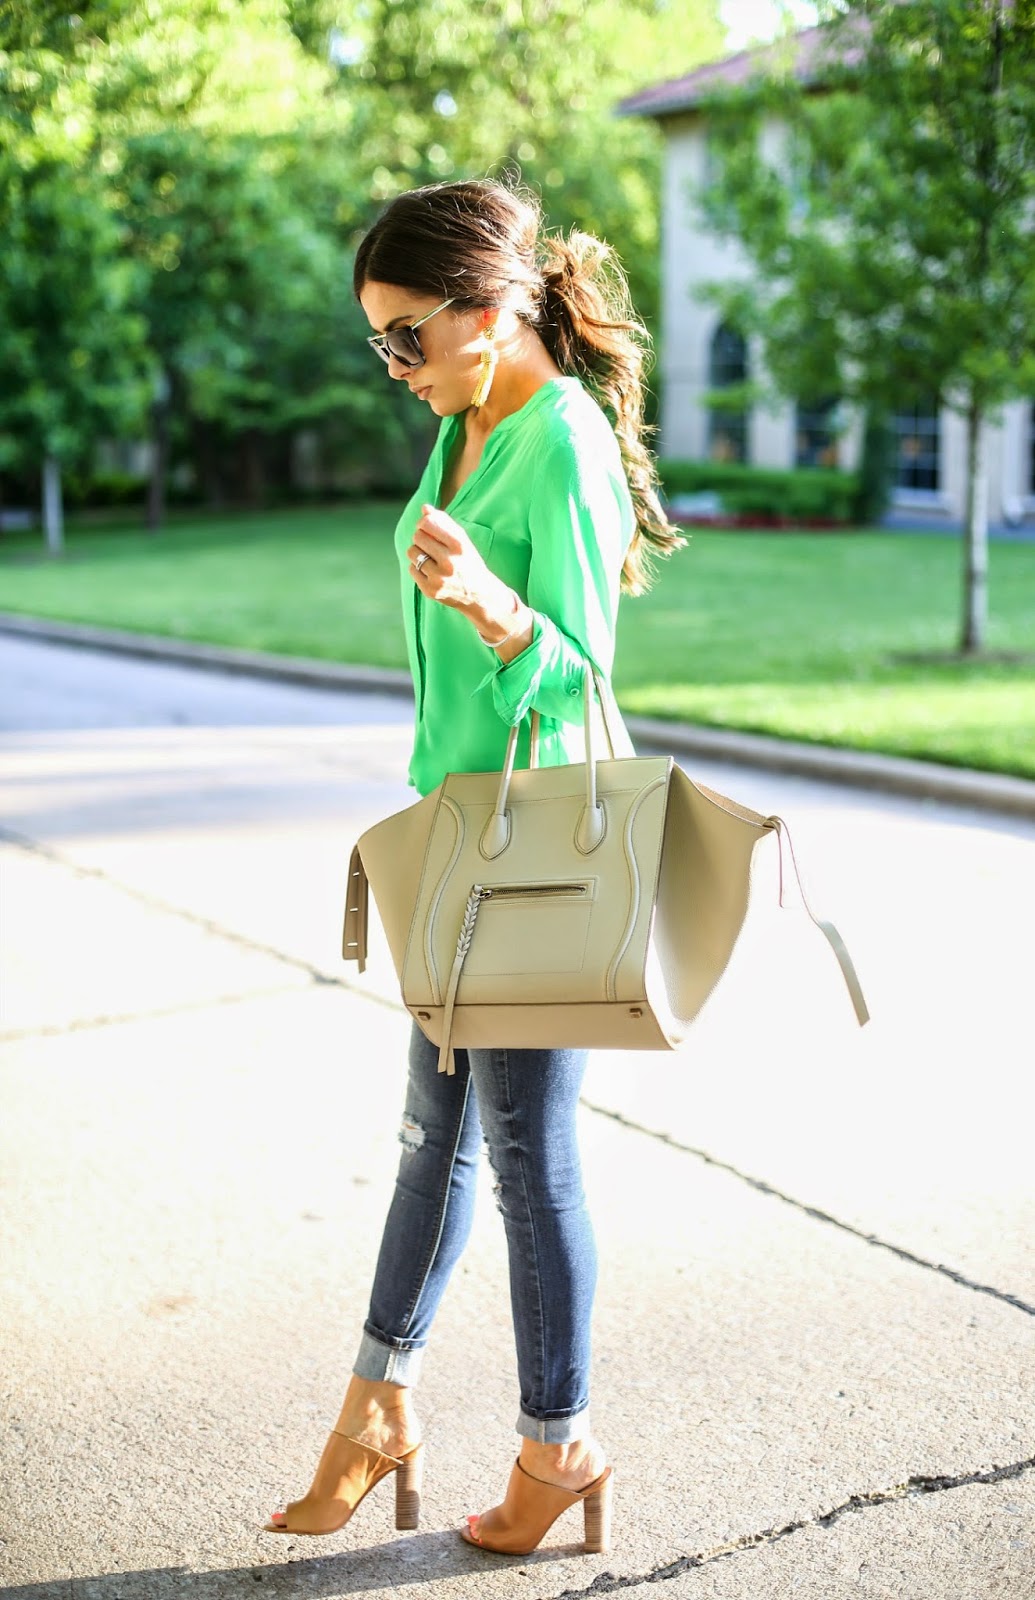 Casual Summer Outfit Ideas in Bright Colors